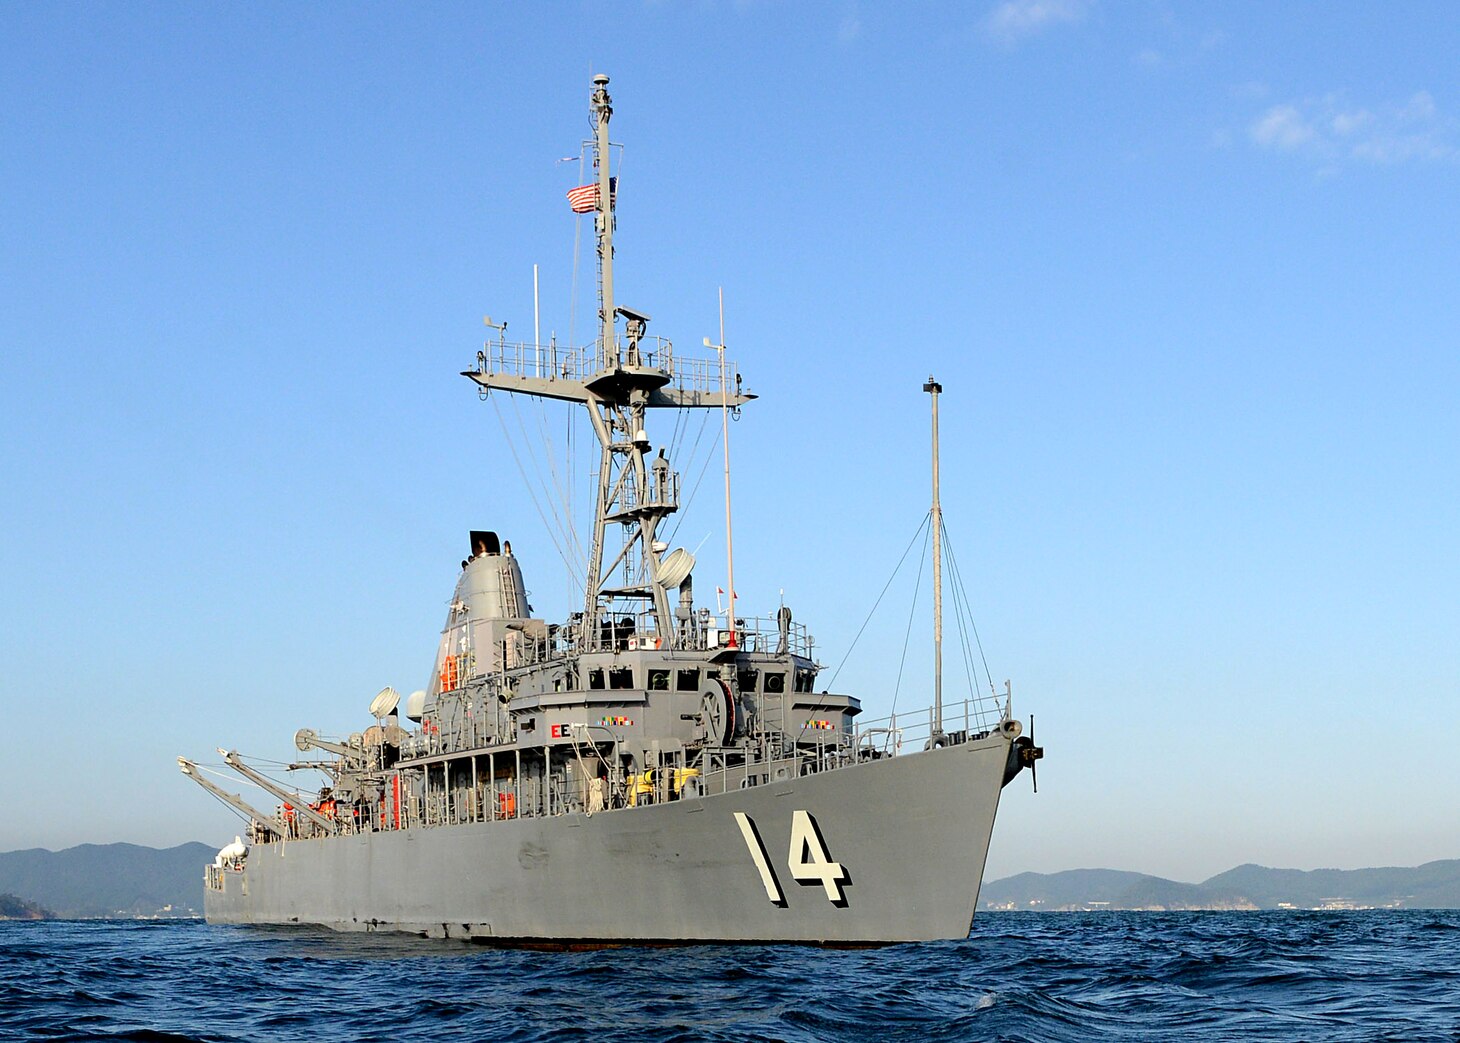 The mine countermeasures ship USS Chief (MCM 14) participates in exercise Clear Horizon 2014 off the coast of the Korean Peninsula Oct. 23, 2014. Clear Horizon is an annual bilateral exercise between the U.S. and South Korean navies designed to enhance cooperation and improve capabilities in mine countermeasure operations. (U.S. Navy photo by Mass Communication Specialist 1st Class Frank L. Andrews/Released)